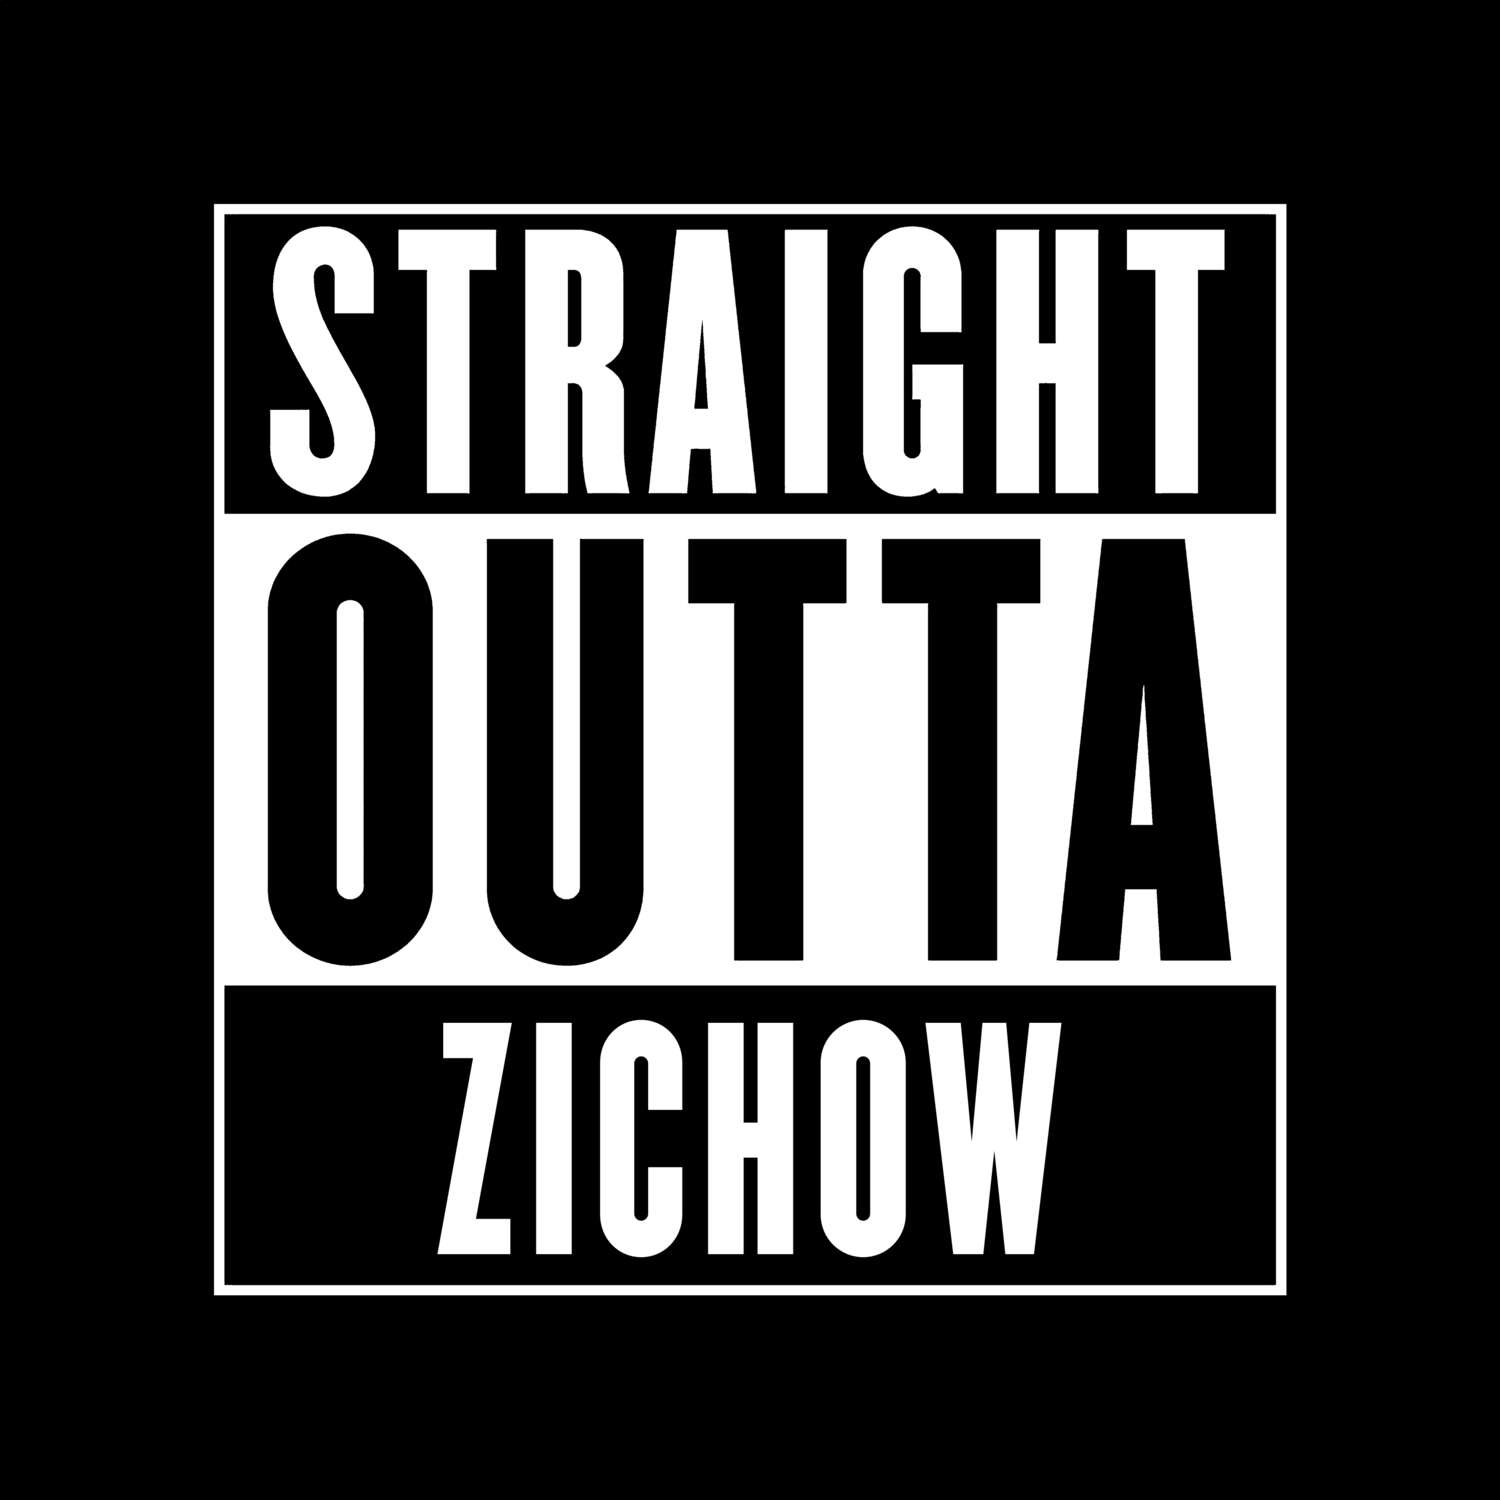 Zichow T-Shirt »Straight Outta«